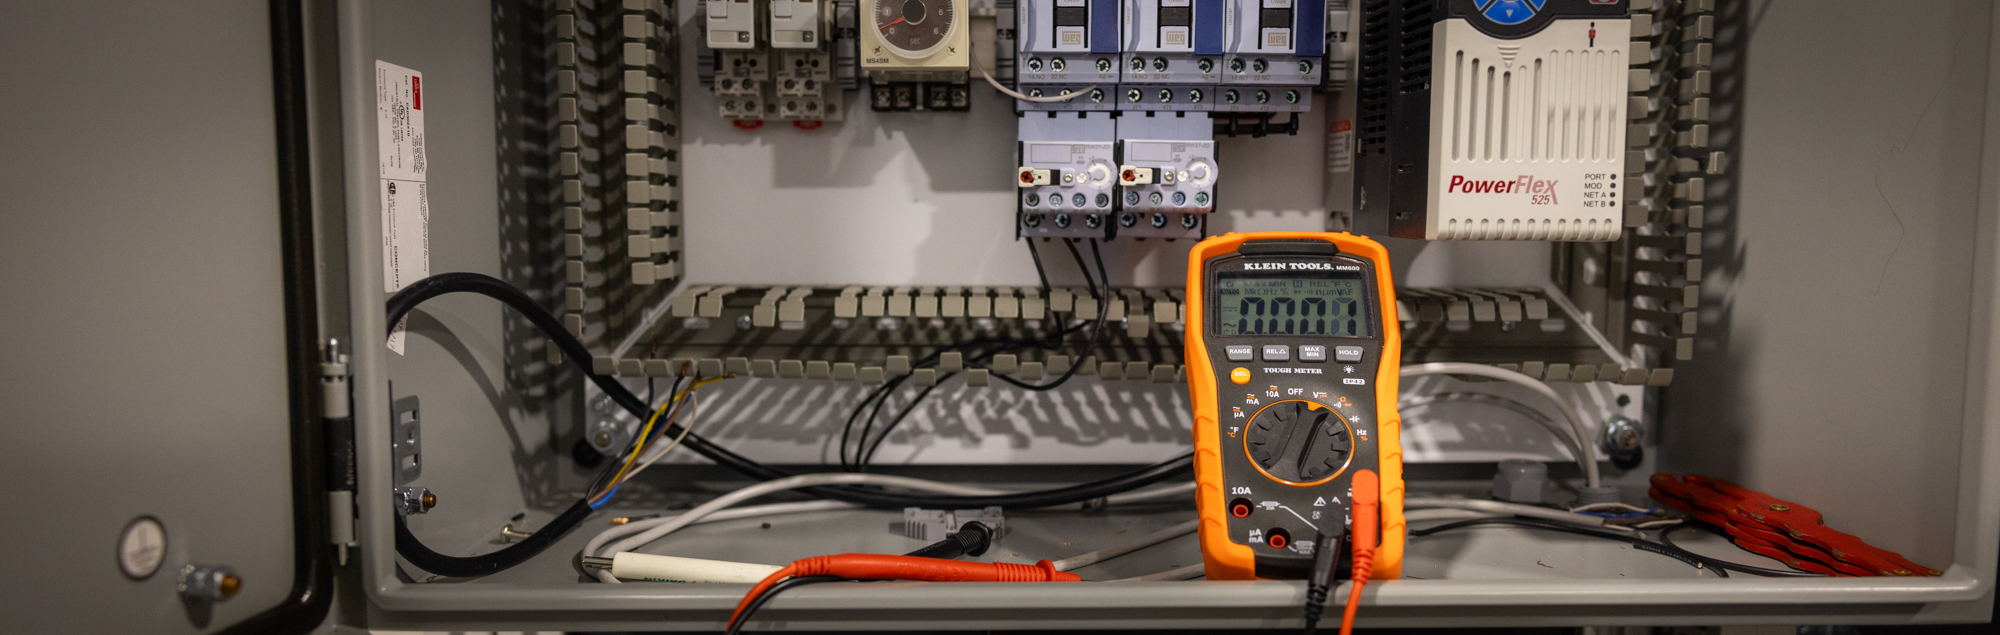 Voltage meter and electrical panel